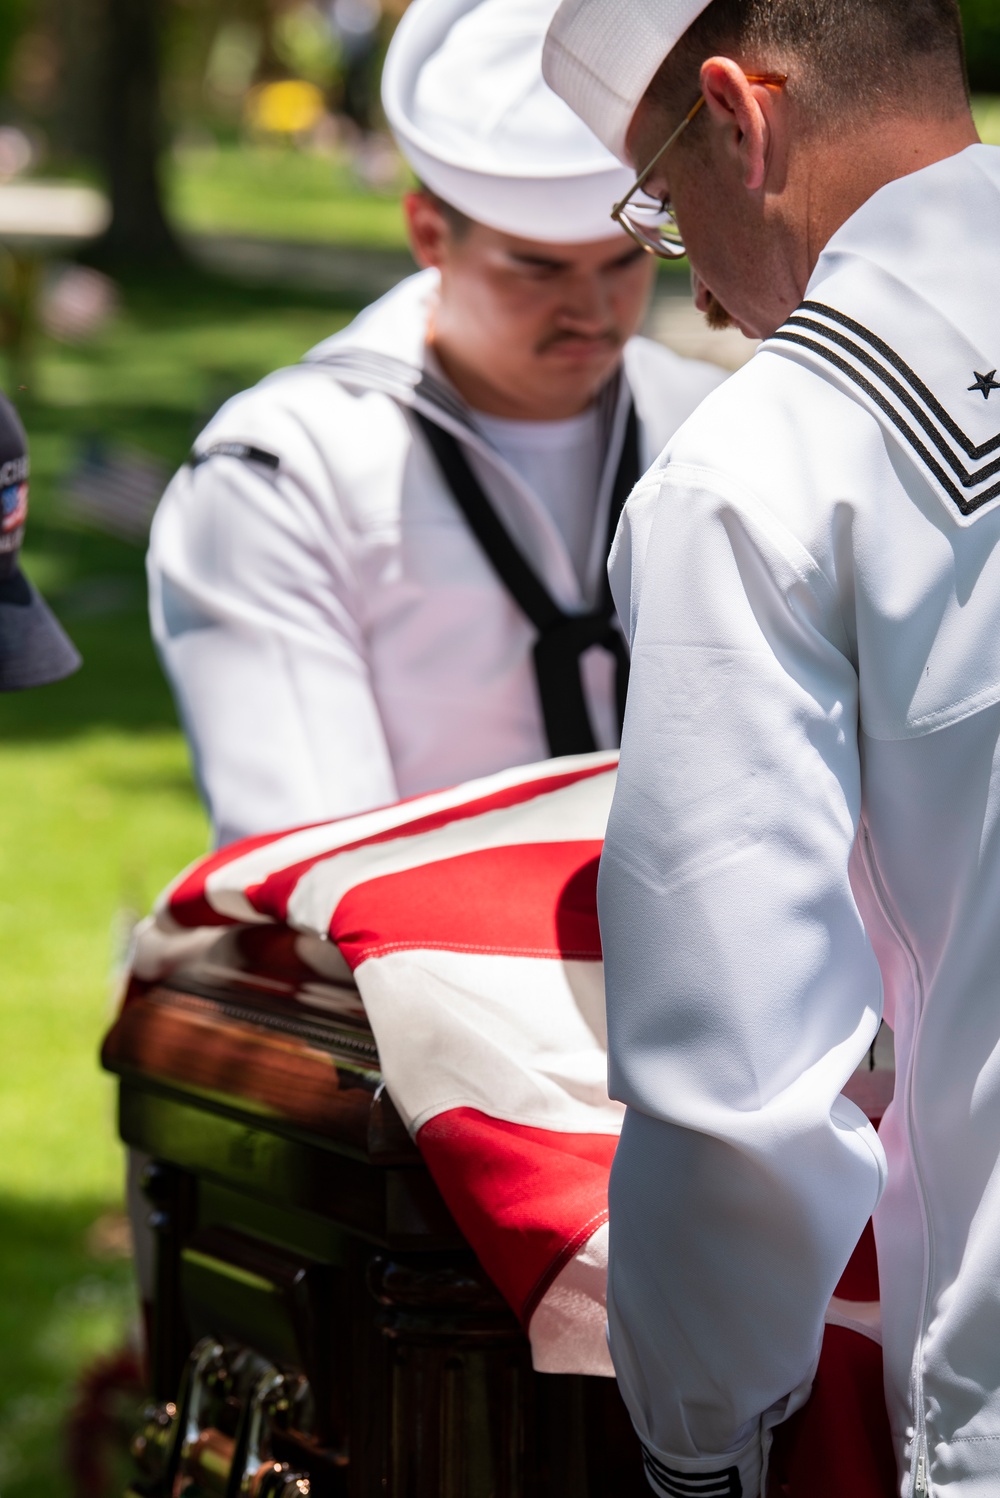 Funeral for USS Oklahoma sailor accounted for from WWII – S1C Camillus M. O’Grady